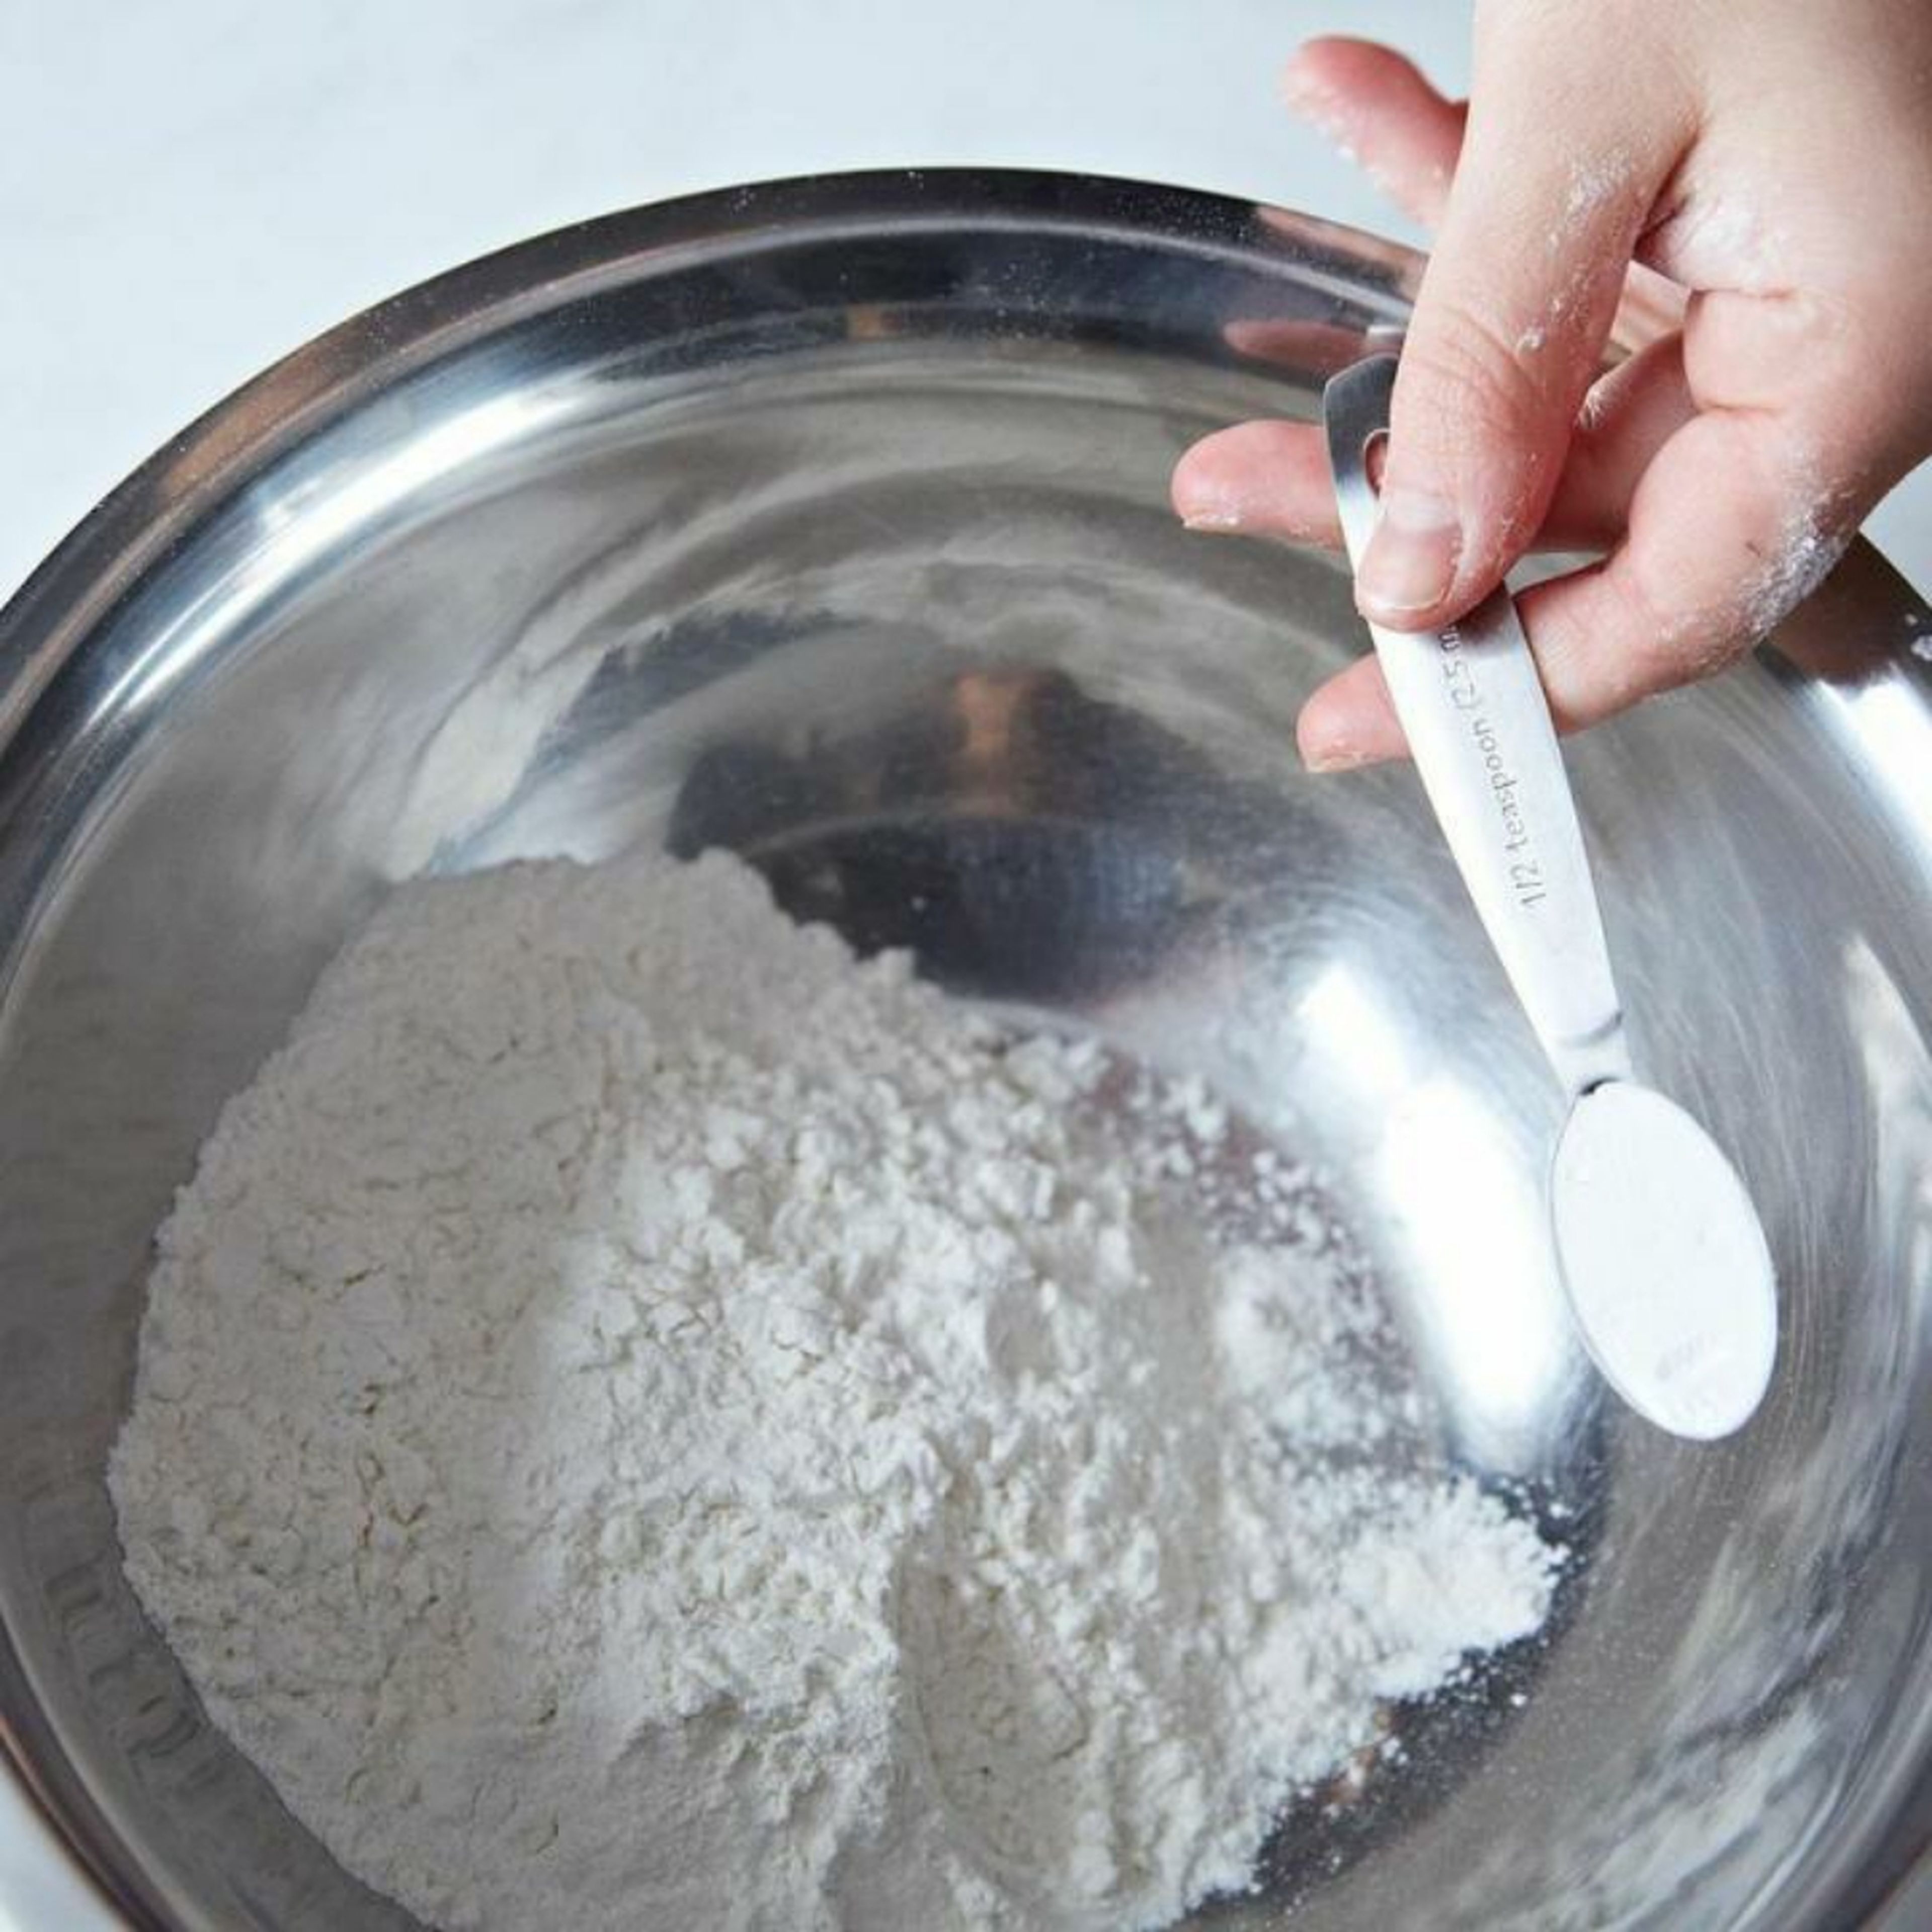 We mix the baking powder with the flour and then put it in the other mixture that we did earlier.